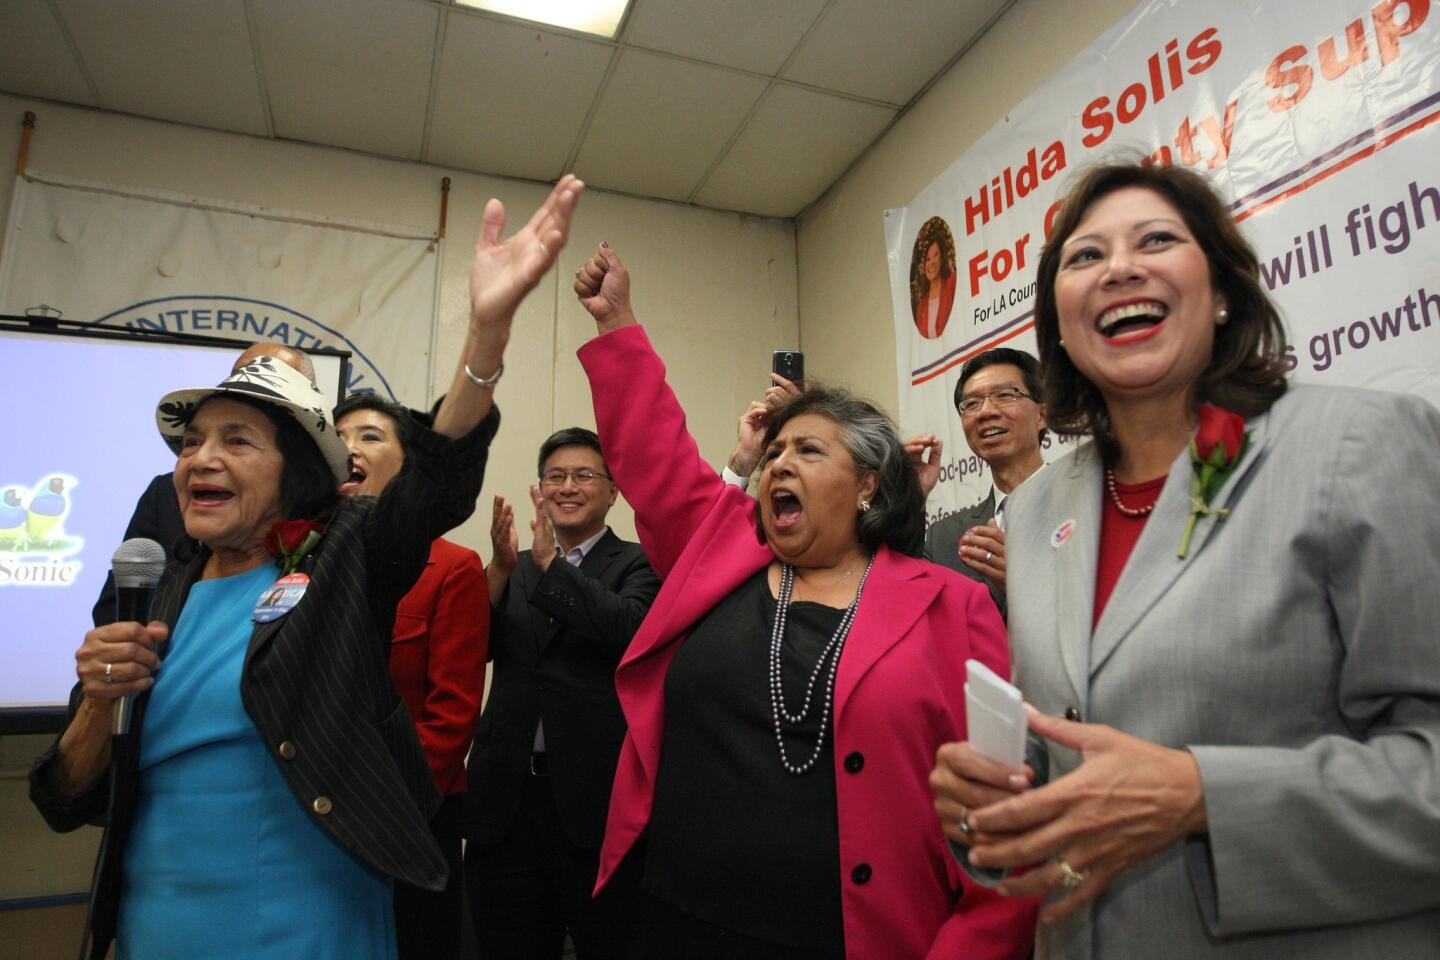 Labor activist Dolores Huerta, left, L.A. County Supervisor Gloria Molina and supervisor candidate Hilda Solis cheer during Solis' election night party at the Laborers' International Union of North America Local 300 hall in El Monte.